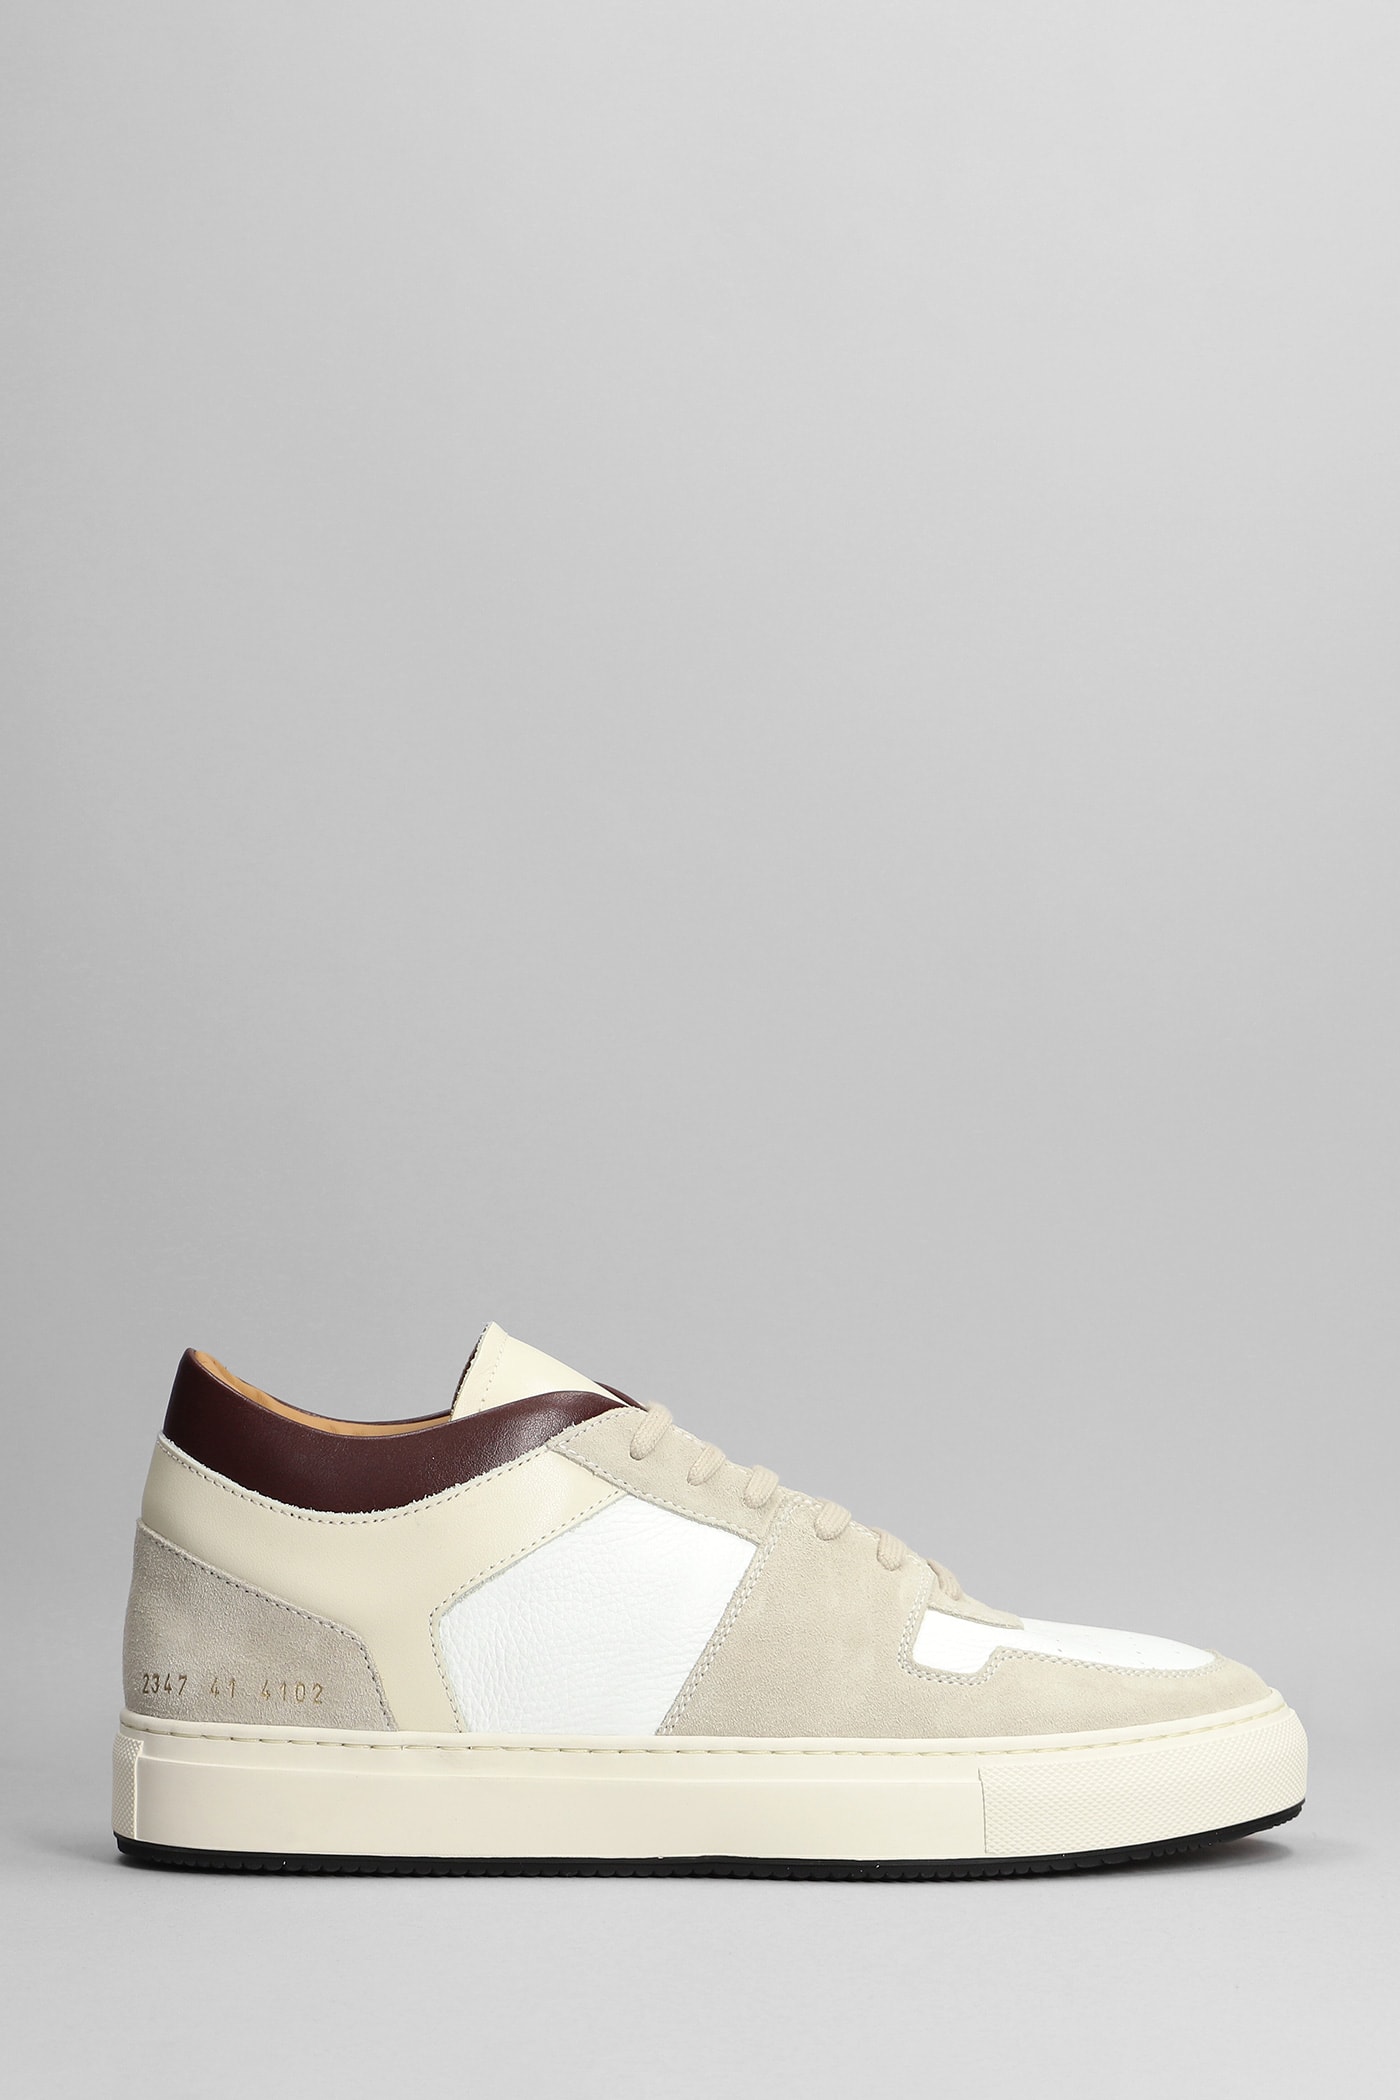 Common Projects Decades Sneakers In Beige Suede And Leather